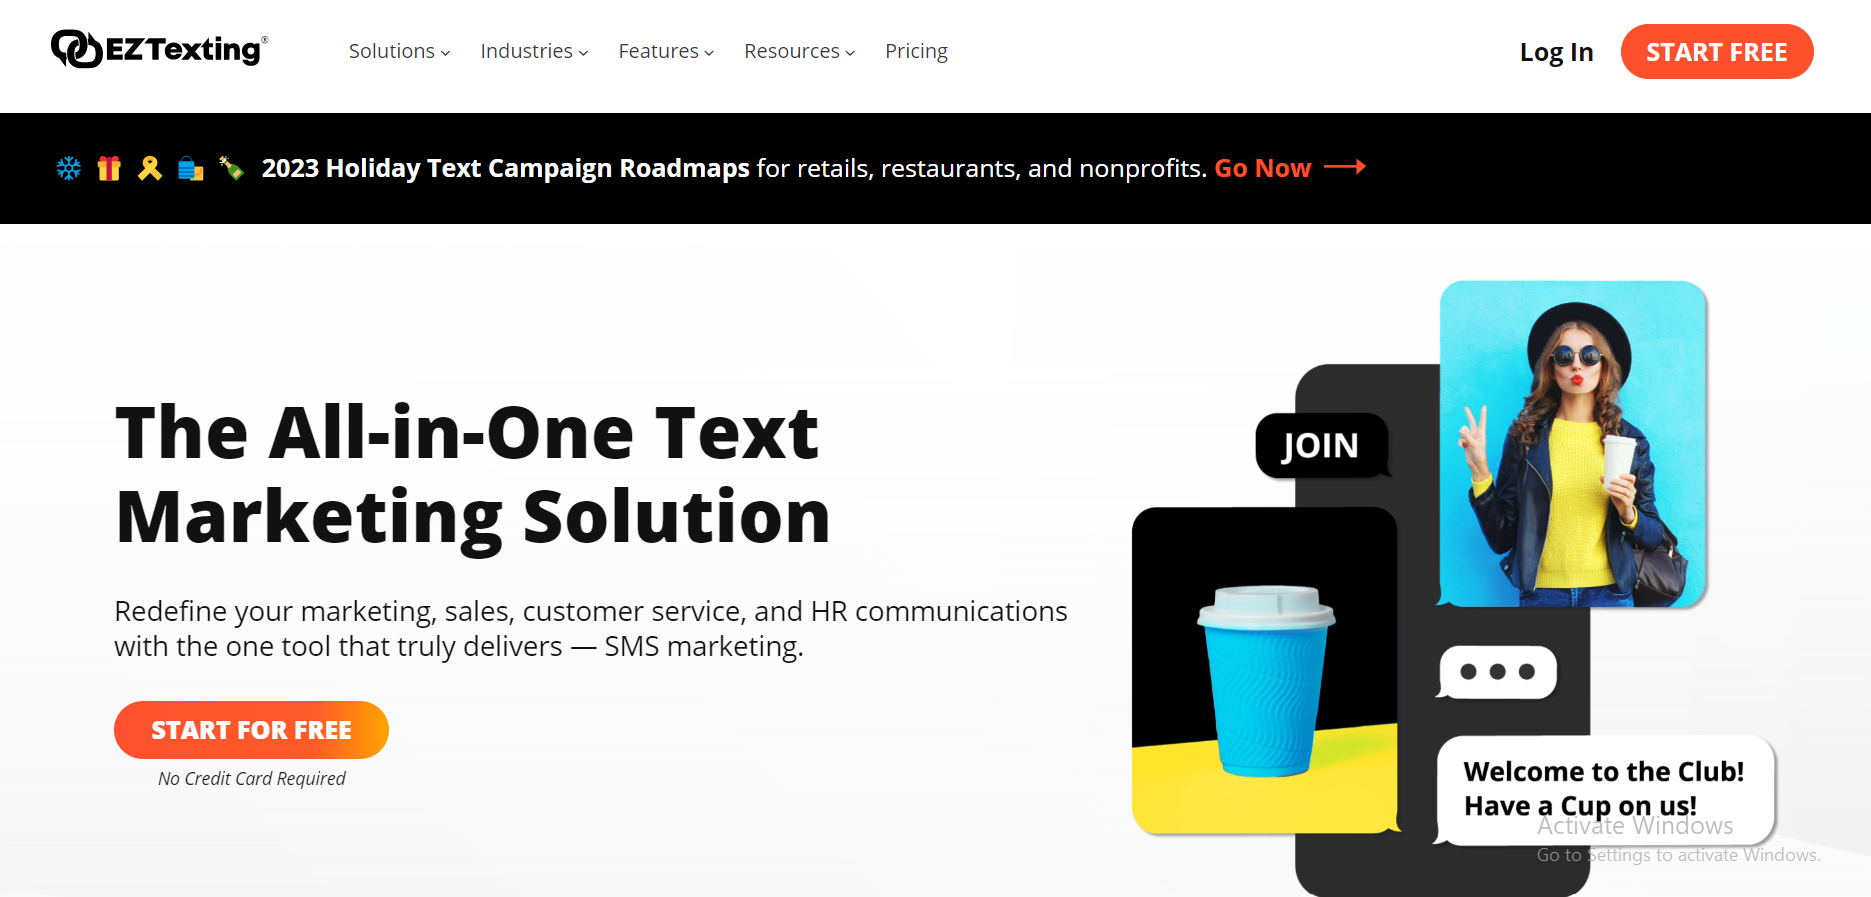 EZTexting - Growth marketing software for SMS marketing automation